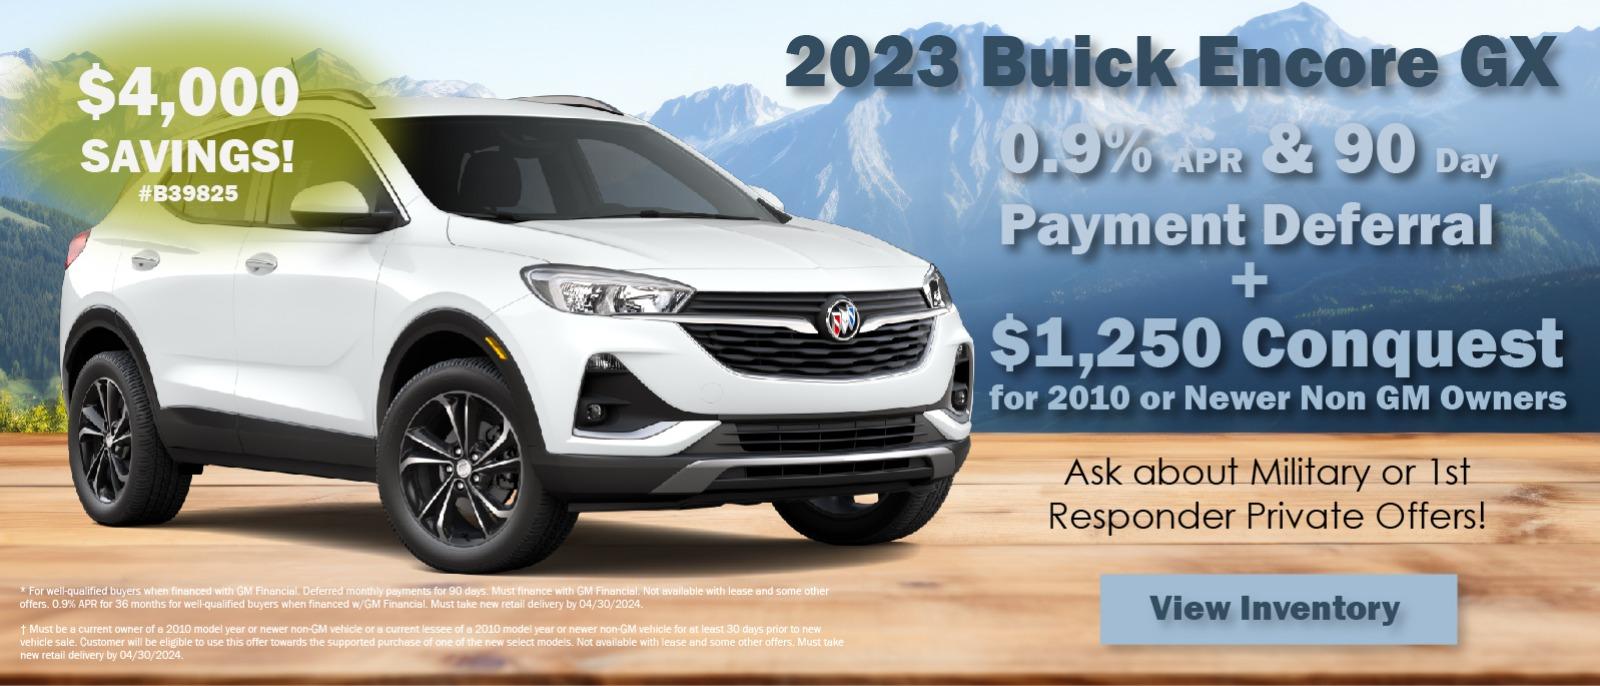 2023 Buick Encore GX
0.9% APR & 90 Day + $1,250 Conquest for 2010 or Newer non GM Owners